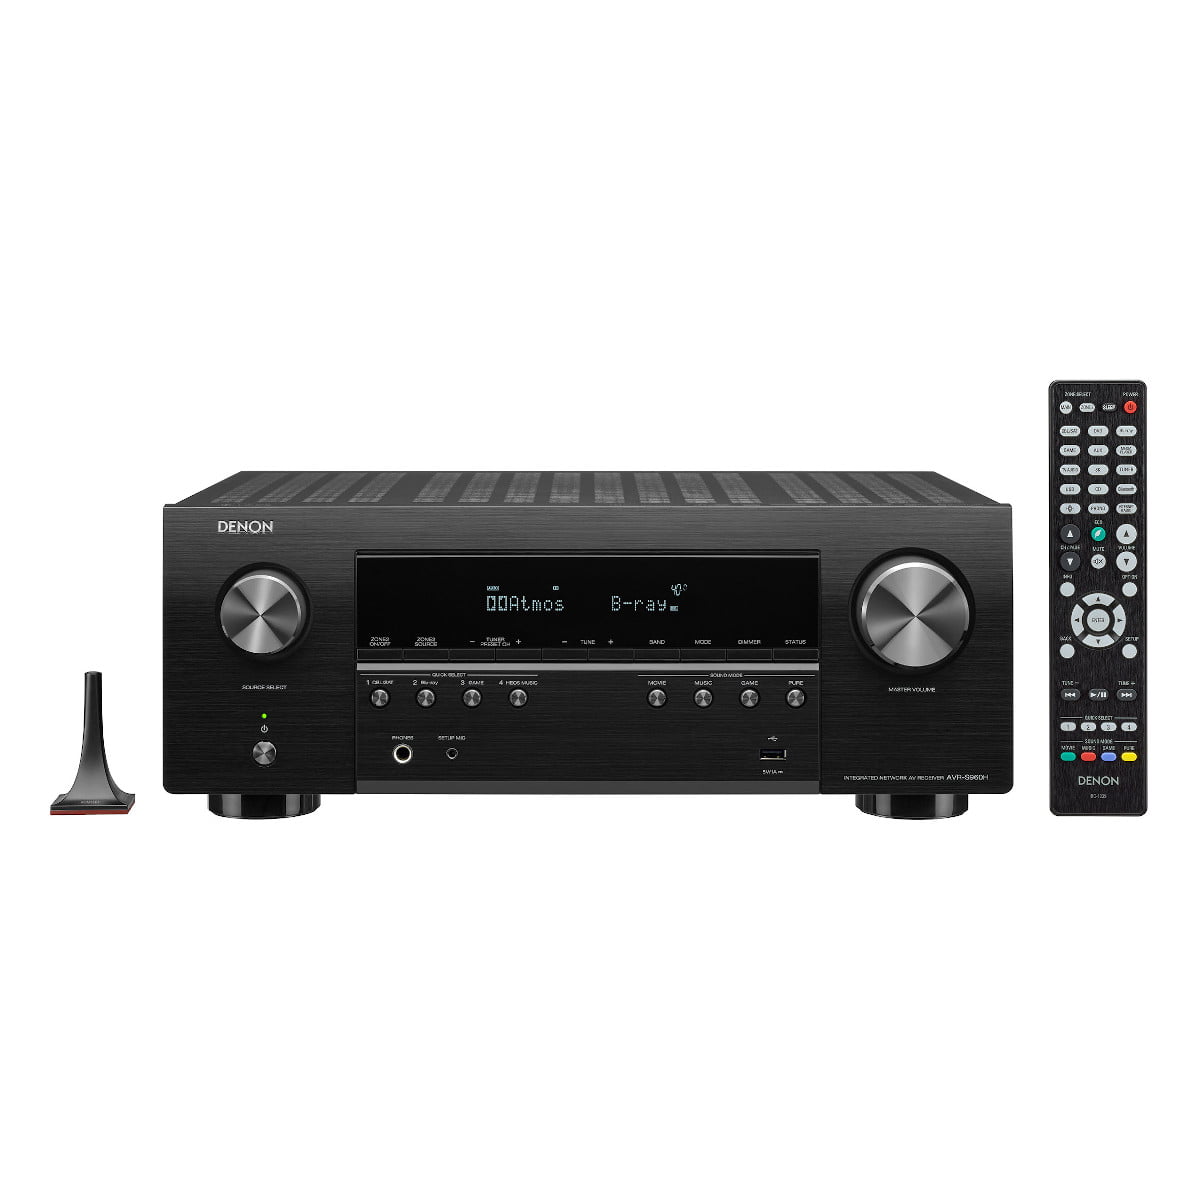 Denon AVR-S960H 7.2-Channel 4K Home Theater Receiver with 3D Audio and Voice Control Voice Control